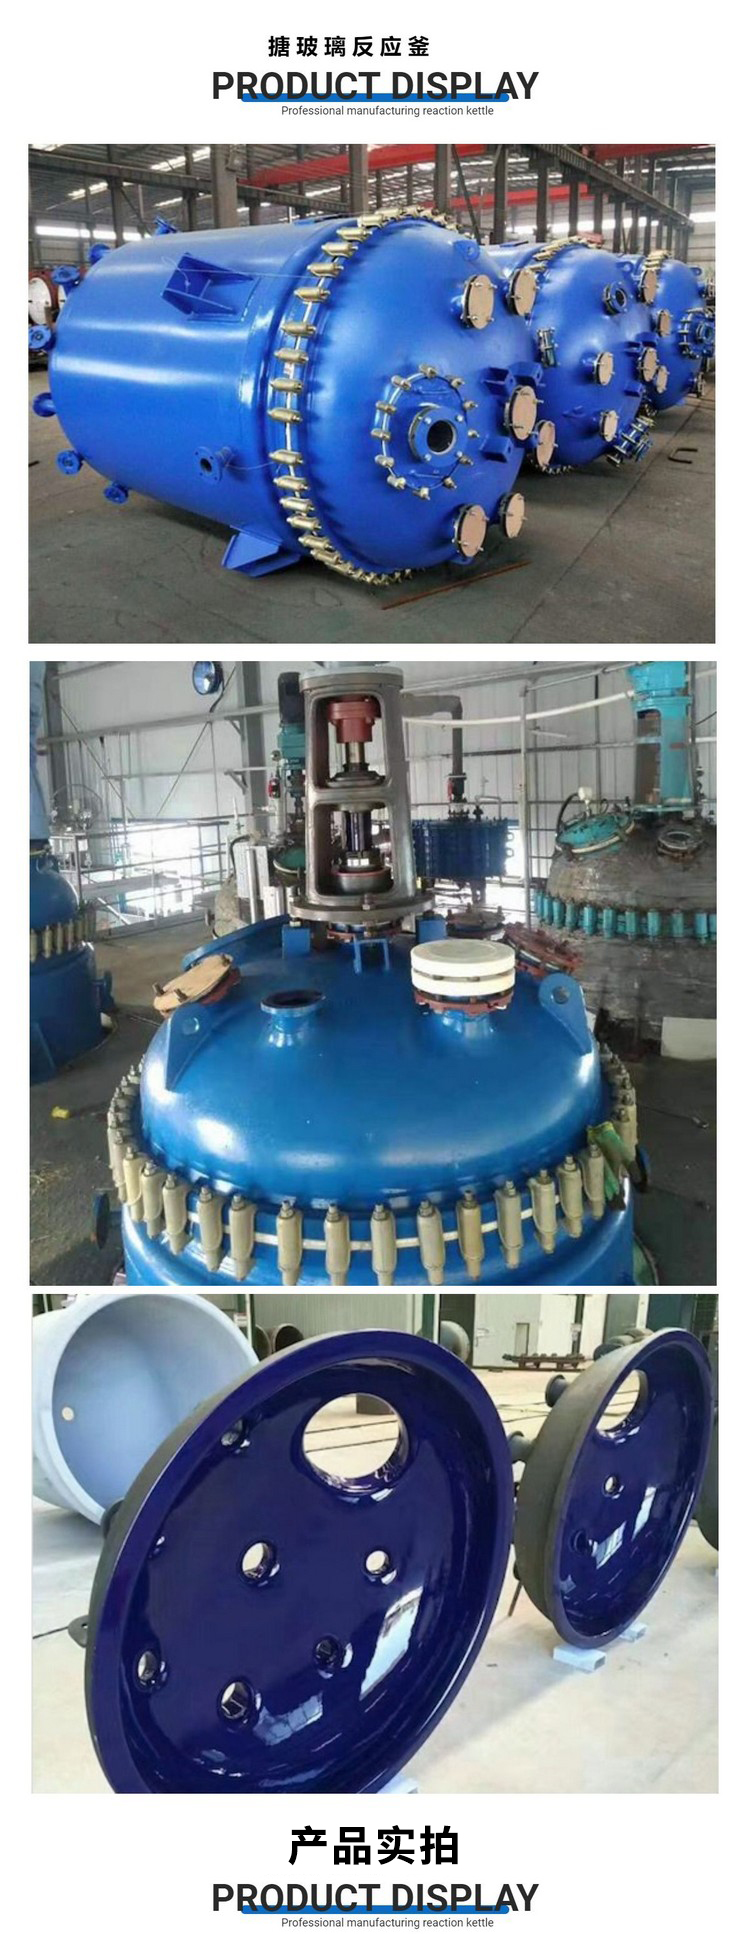 Enamel reaction kettle frame stirring kettle far Red Jacket heating can be delivered to the factory